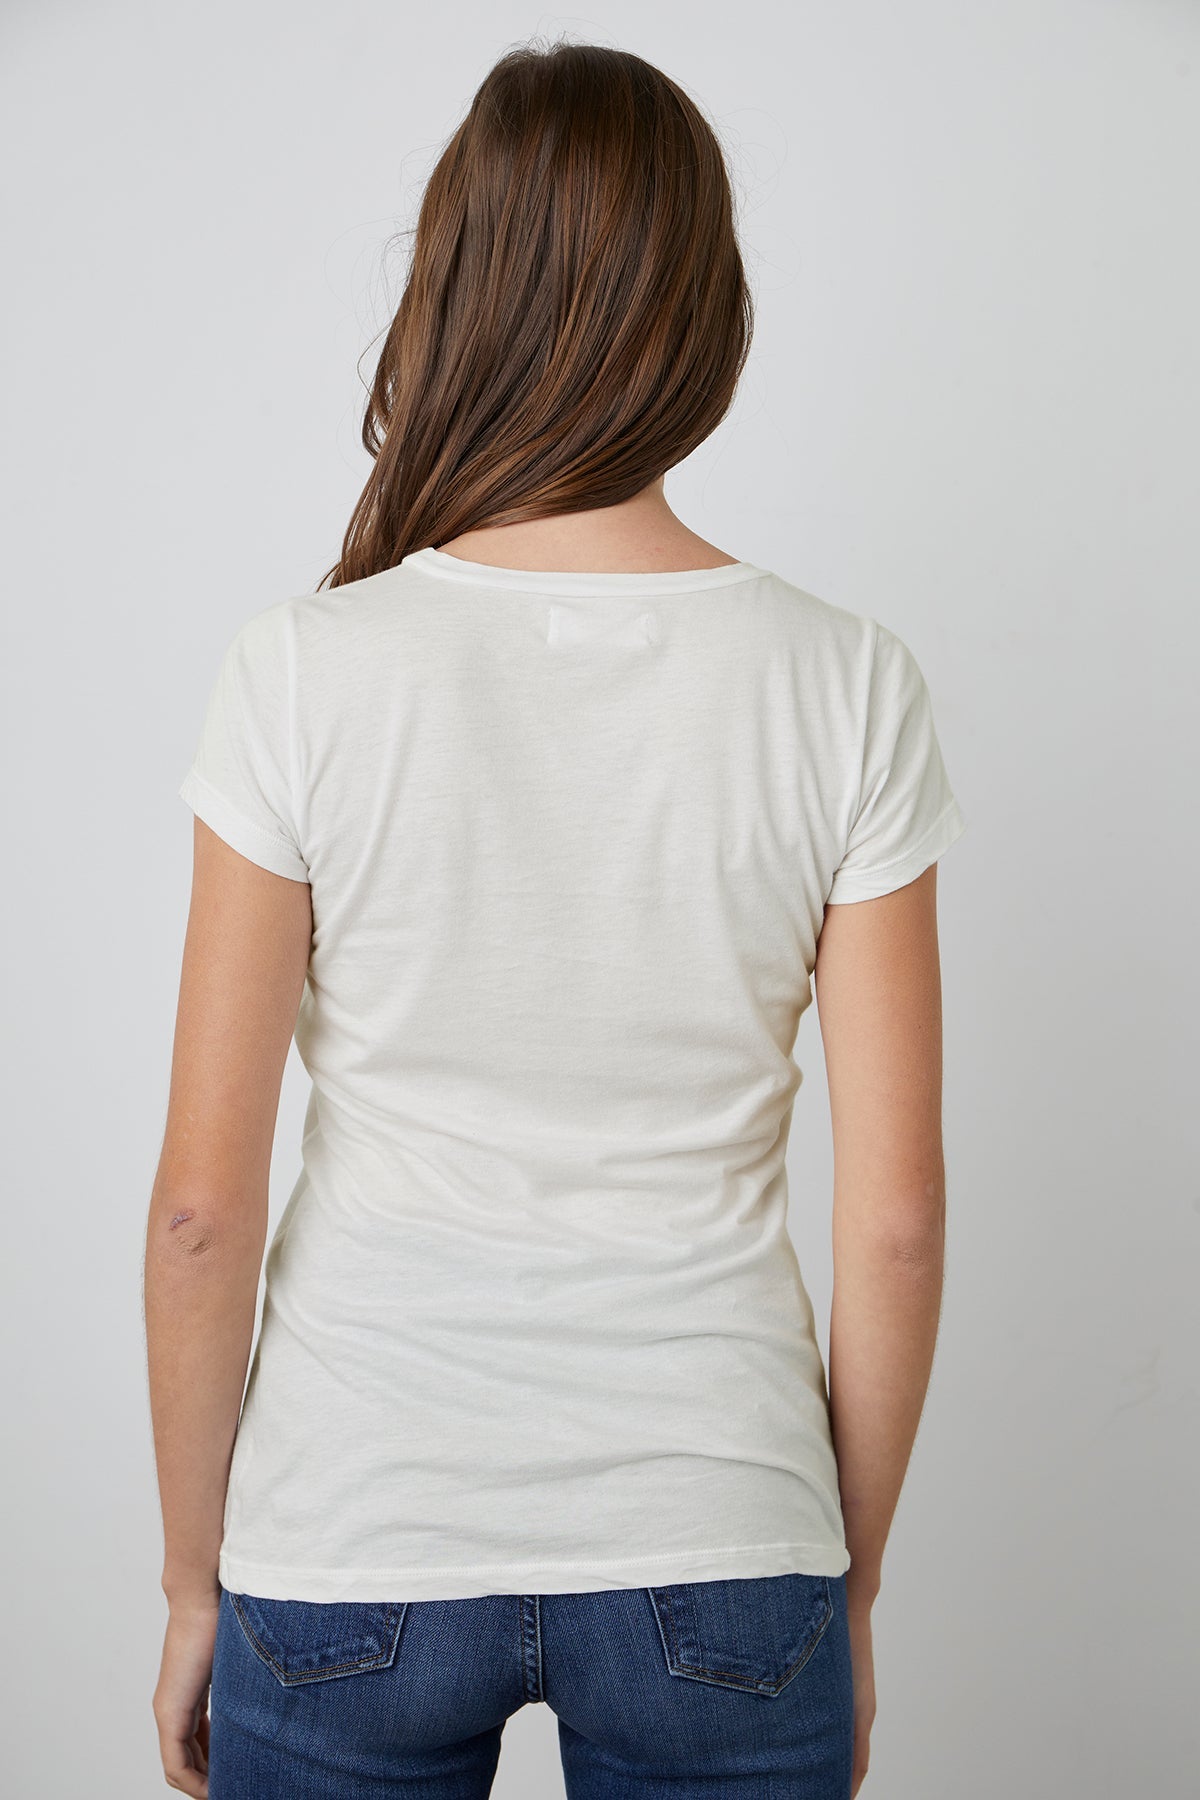 the back view of a woman wearing a Velvet by Graham & Spencer JEMMA GAUZY WHISPER FITTED CREW NECK TEE.-26630463357121